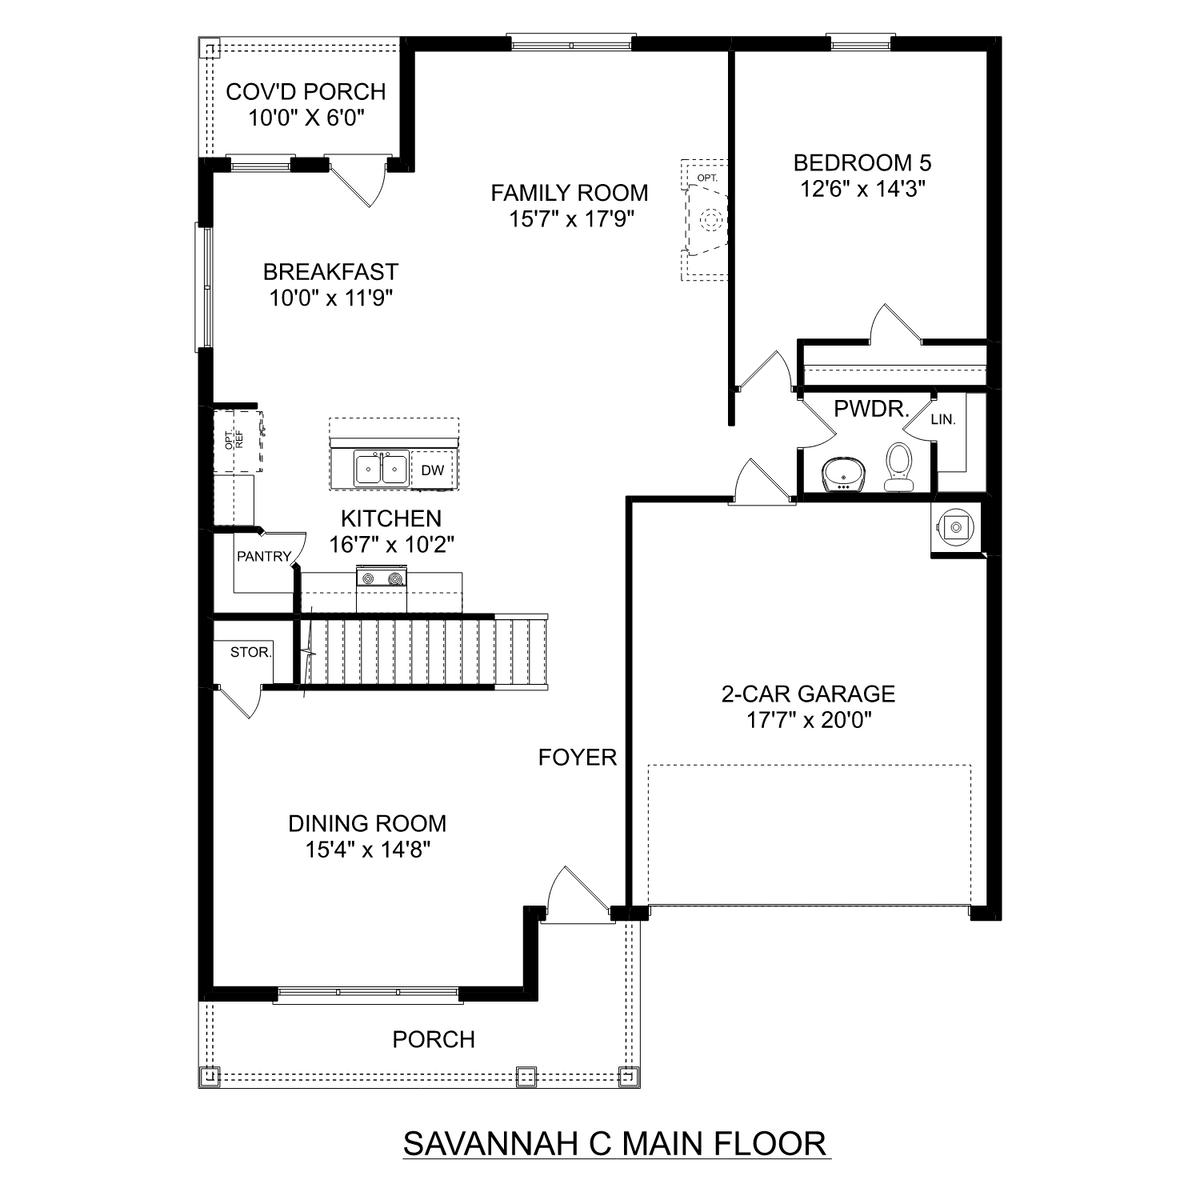 1 - The Savannah C buildable floor plan layout in Davidson Homes' Monteagle Cove community.